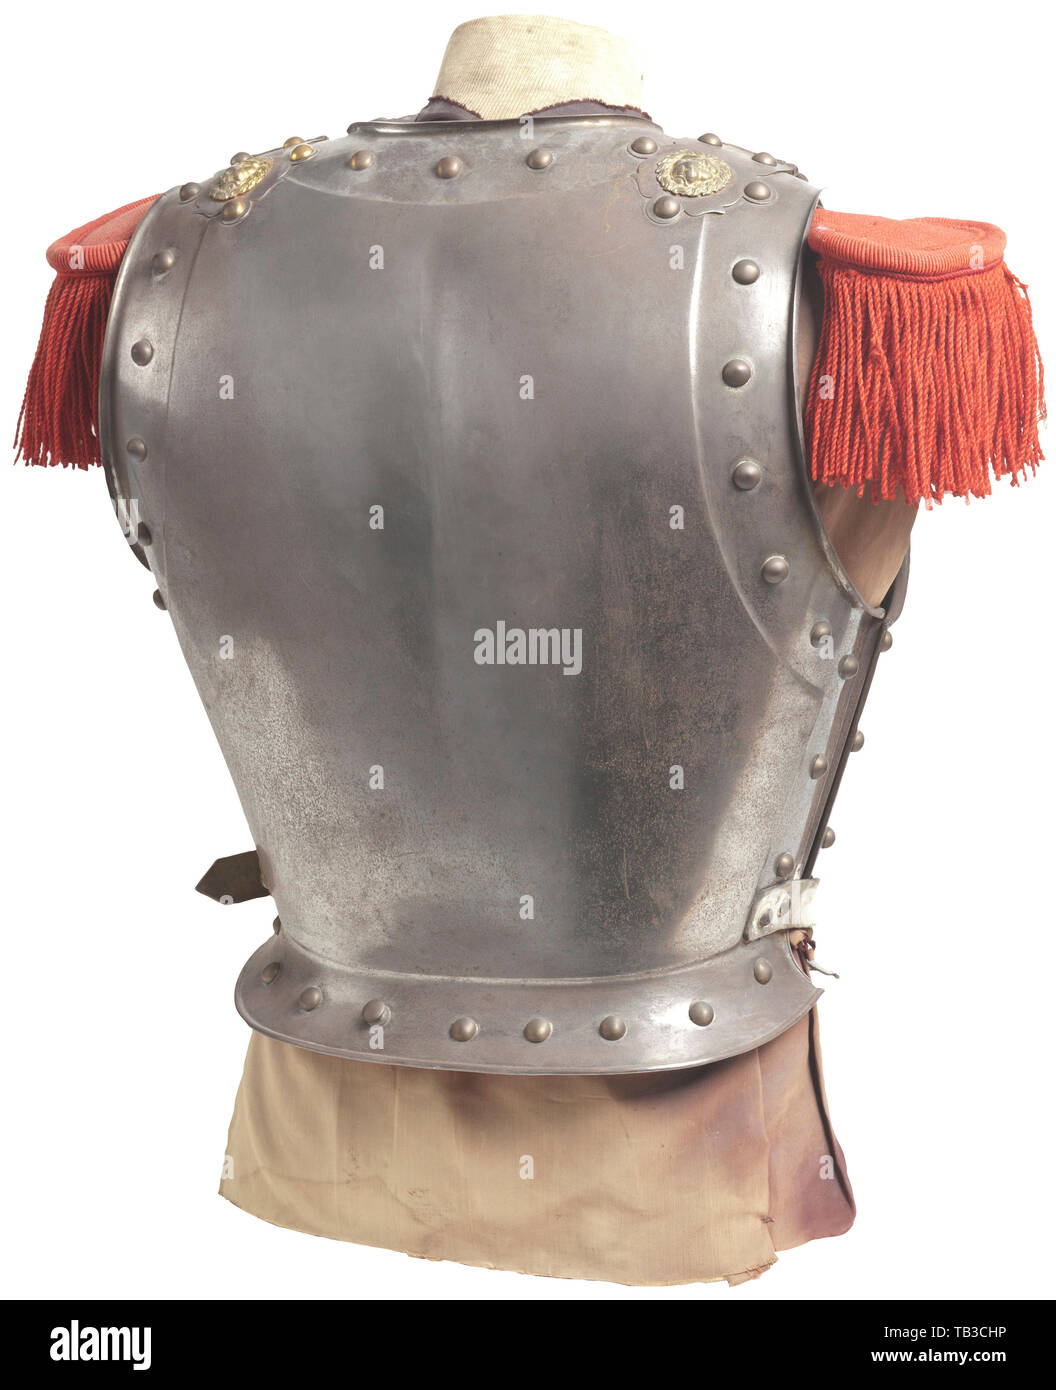 A French Napoleonic cuirass, Metal body with brass hobnails, silver scale straps with gold buckles on front and lion head hinges on back, white leather belly straps, no liner, long tongue red fringed epaulettes, slight pitting and surface rust overall. USA-lot. France, Imperial, French Empire, object, objects, stills, clipping, cut out, cut-out, cut-outs, historic, historical 19th century, Additional-Rights-Clearance-Info-Not-Available Stock Photo